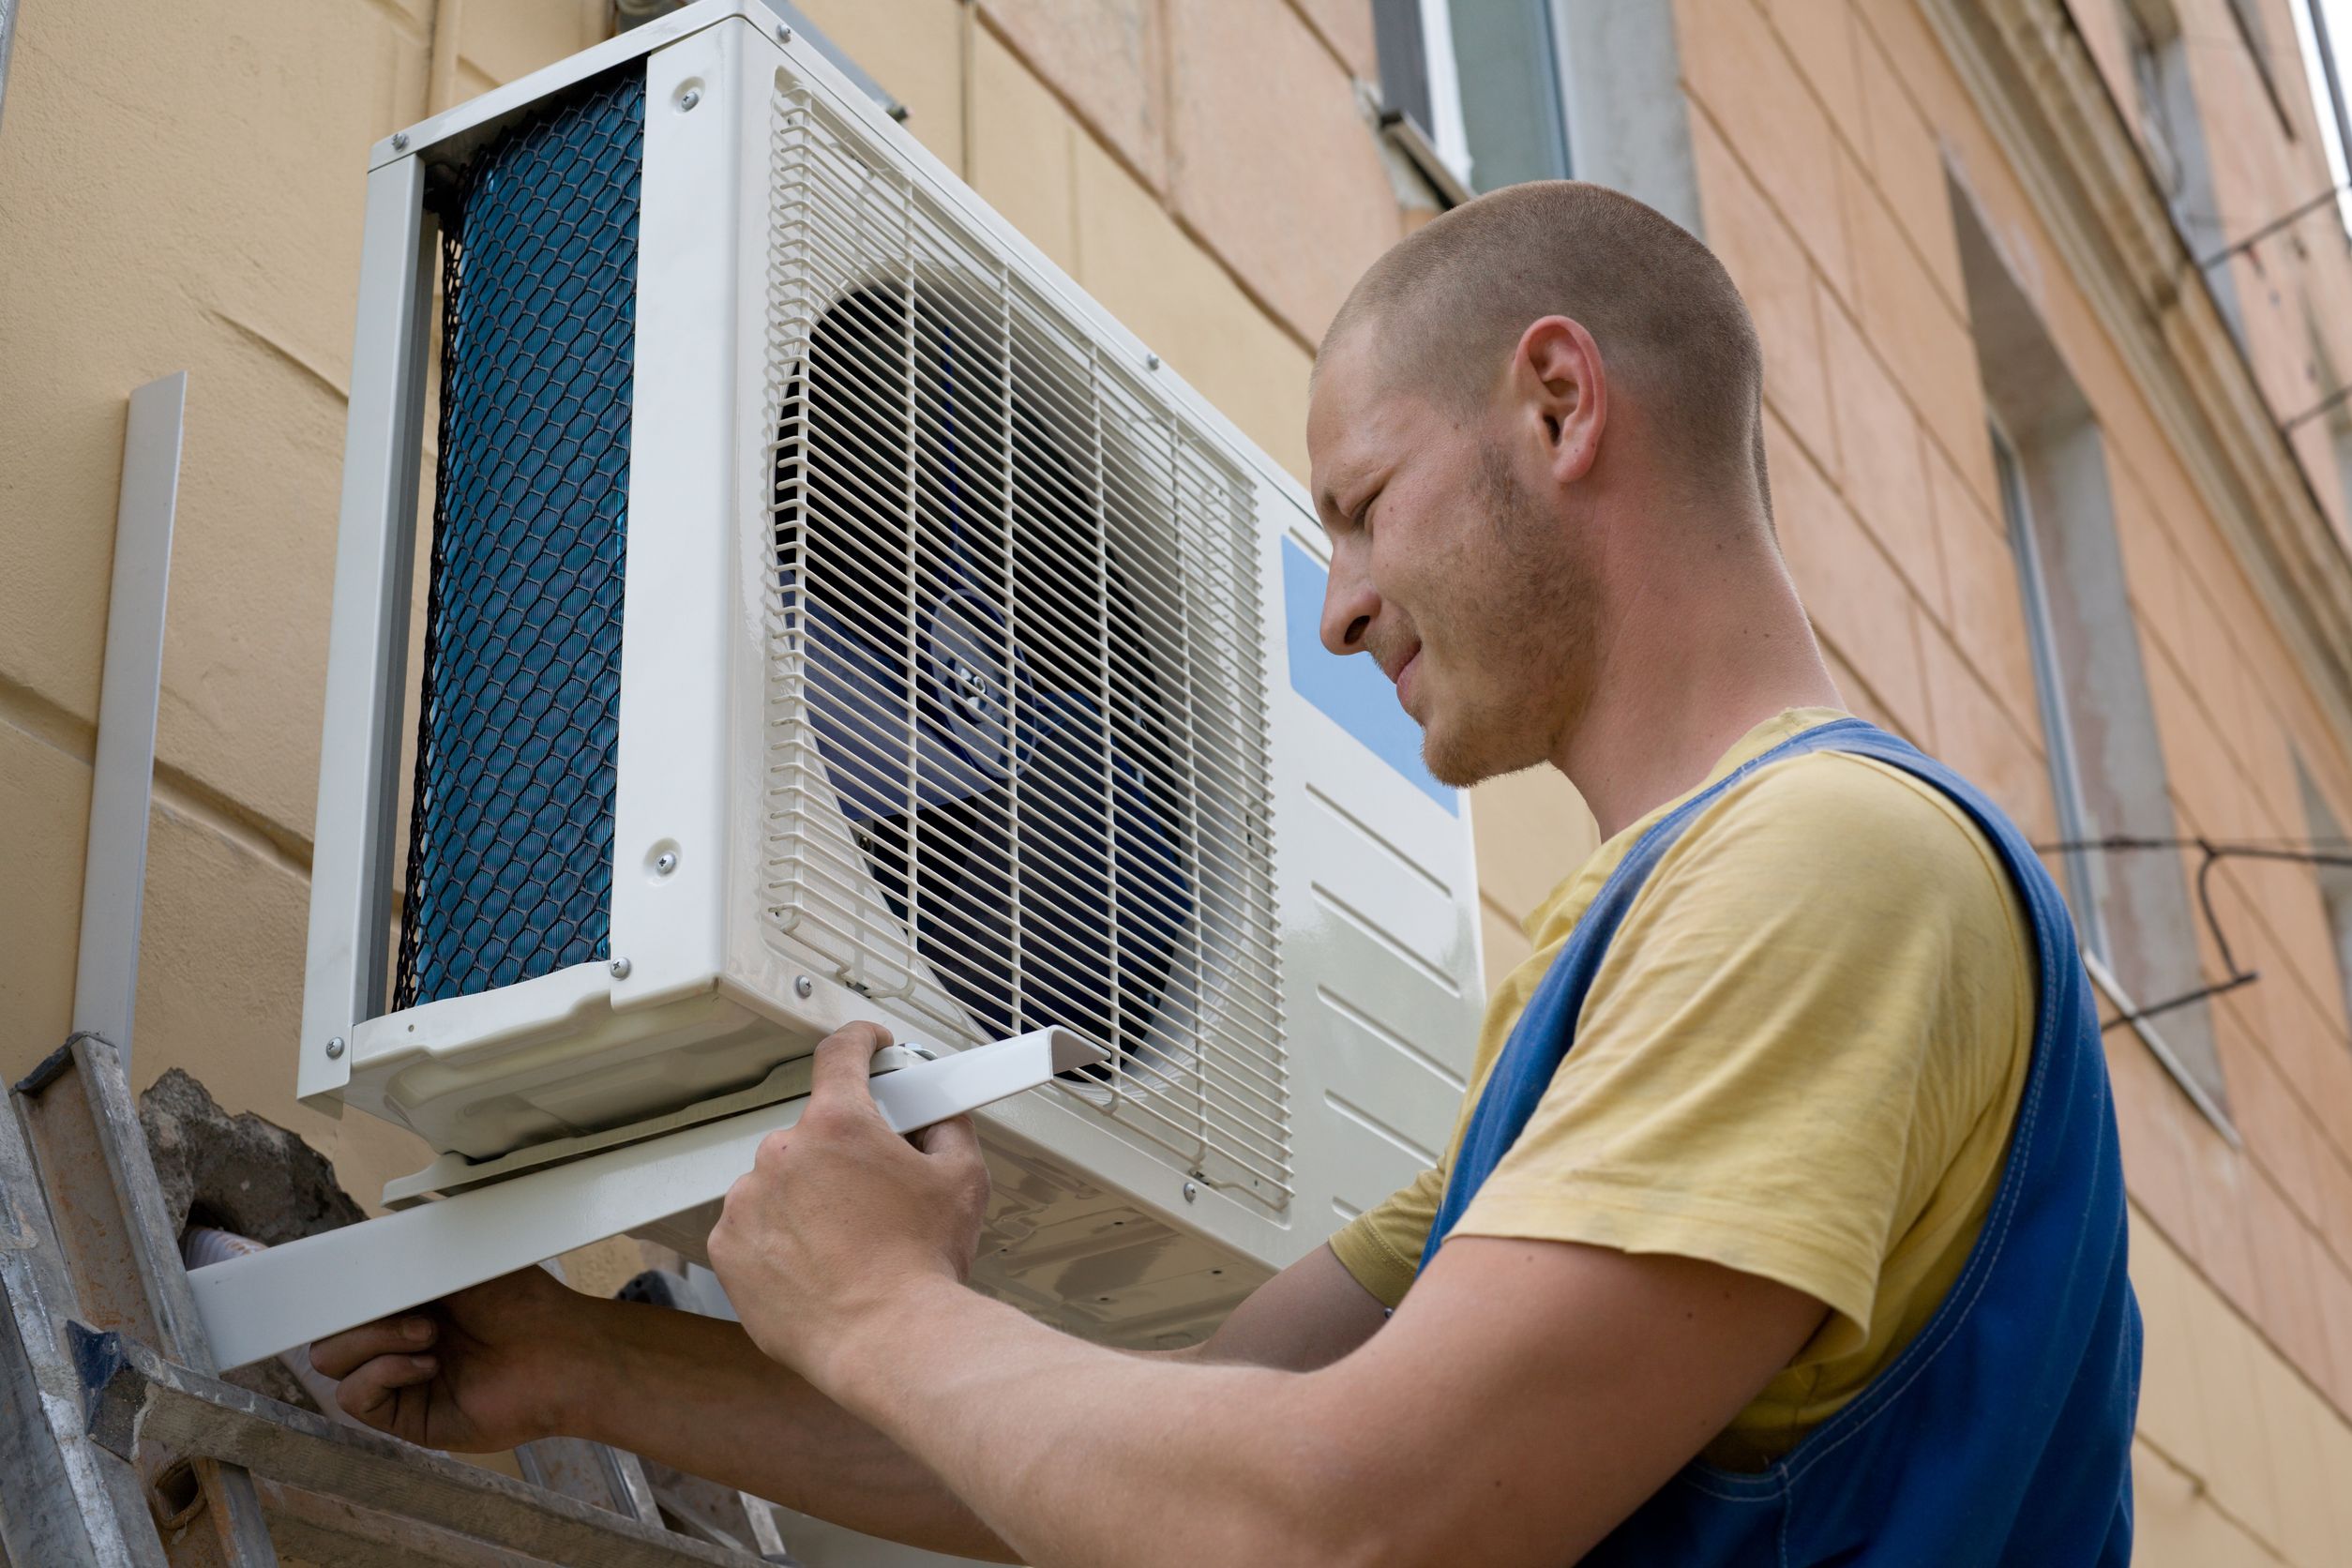 Where to Turn for Affordable & Experienced Heating Repair in the Apex Area